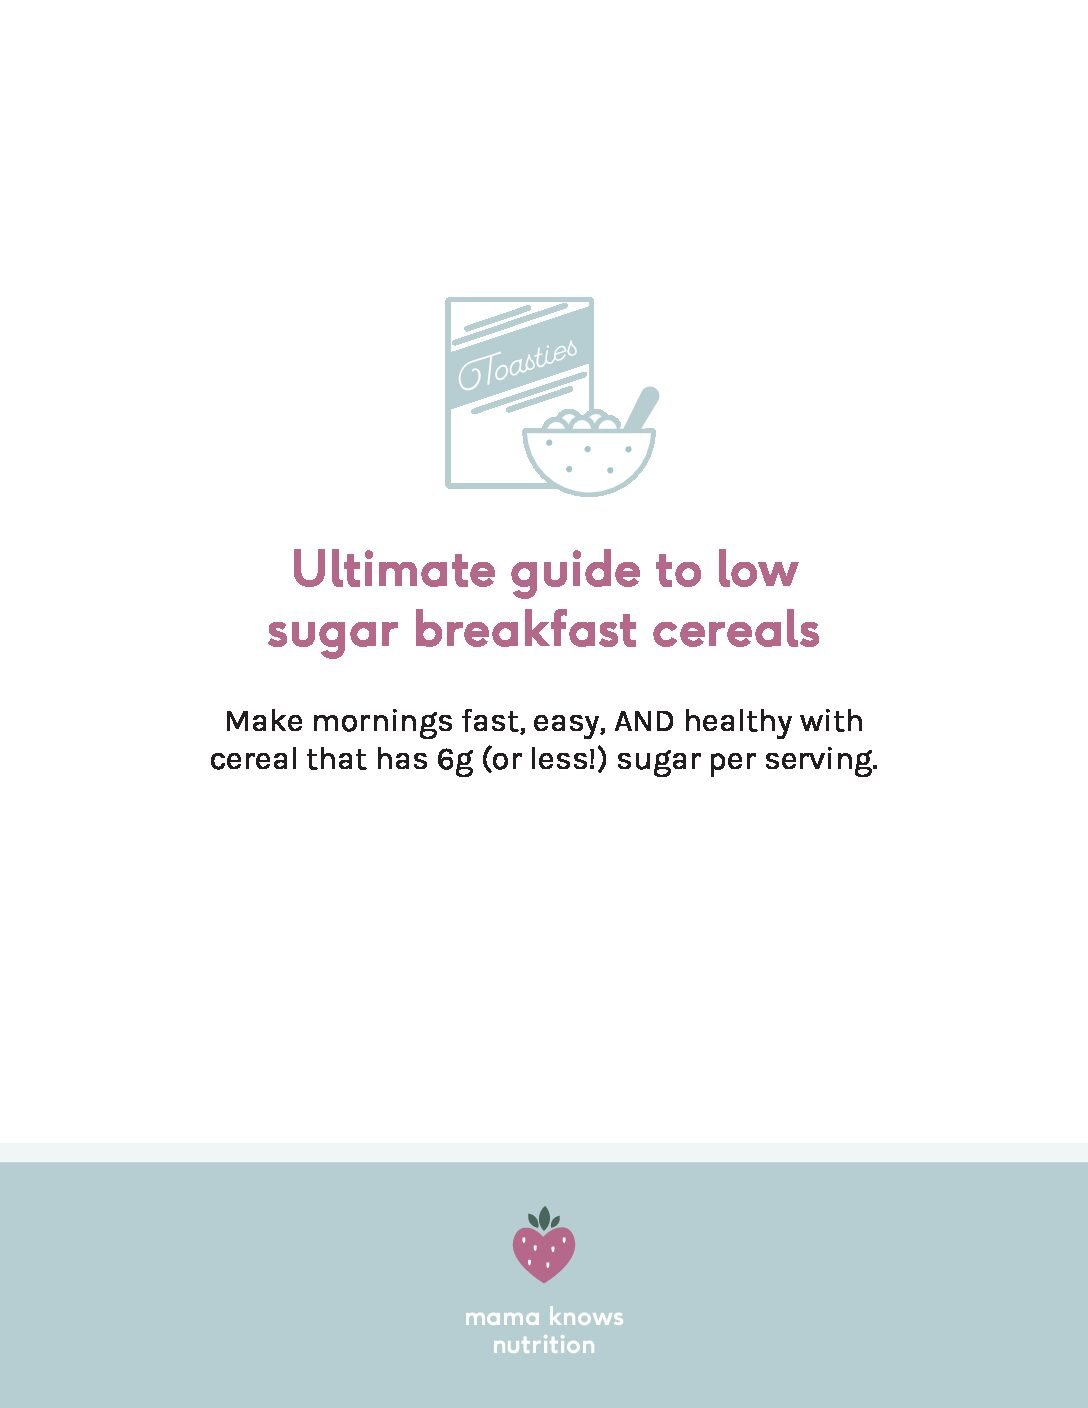 Cover to free cereal guide